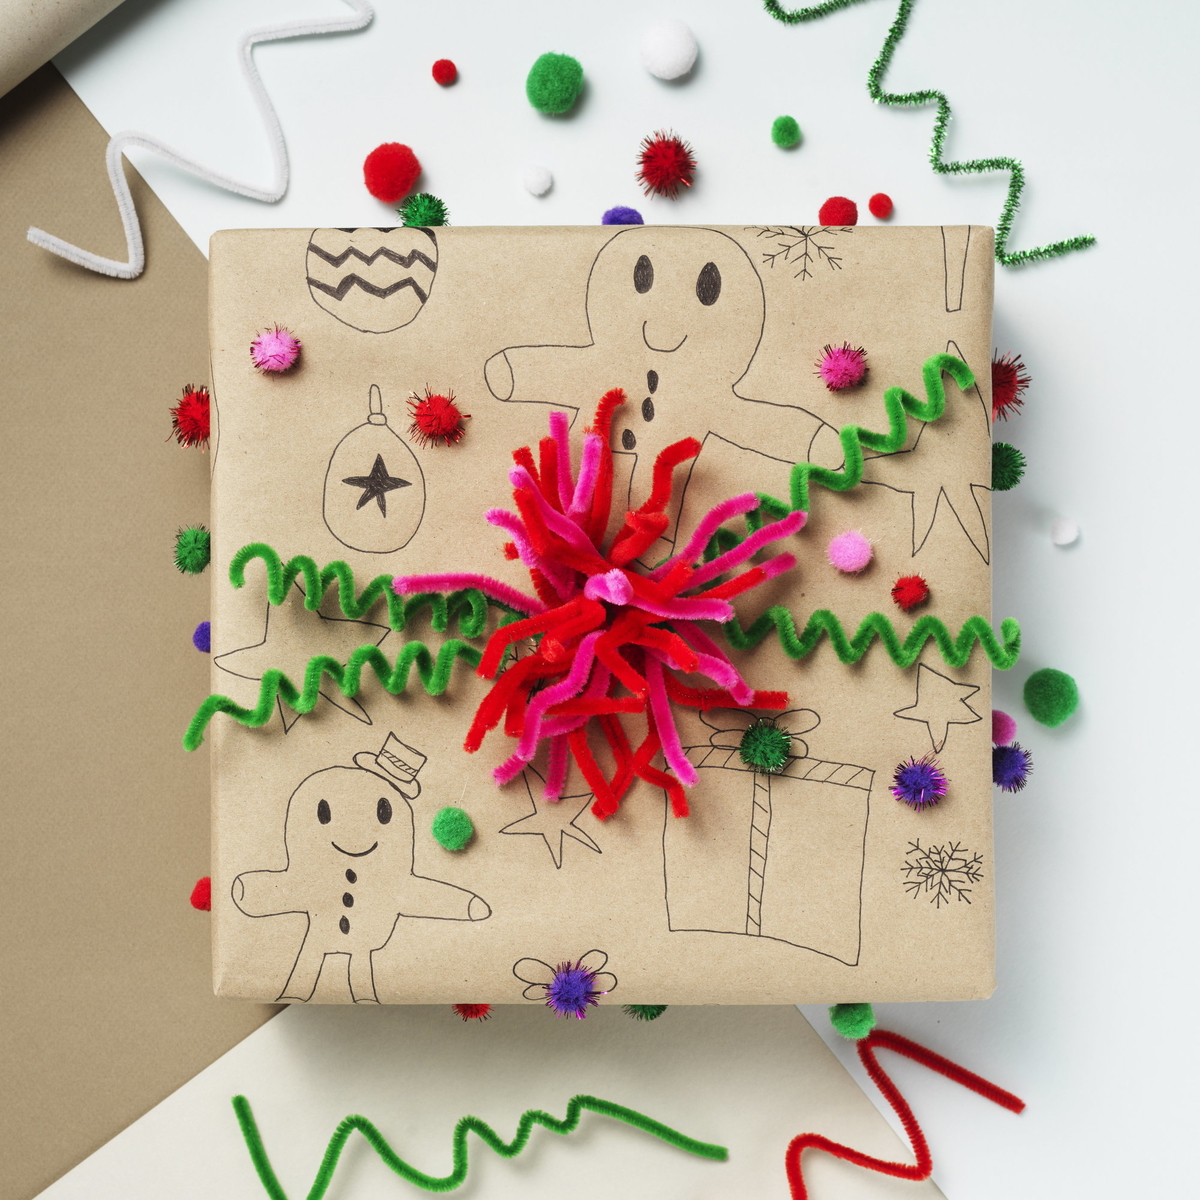 Design your own Christmas gift wrap